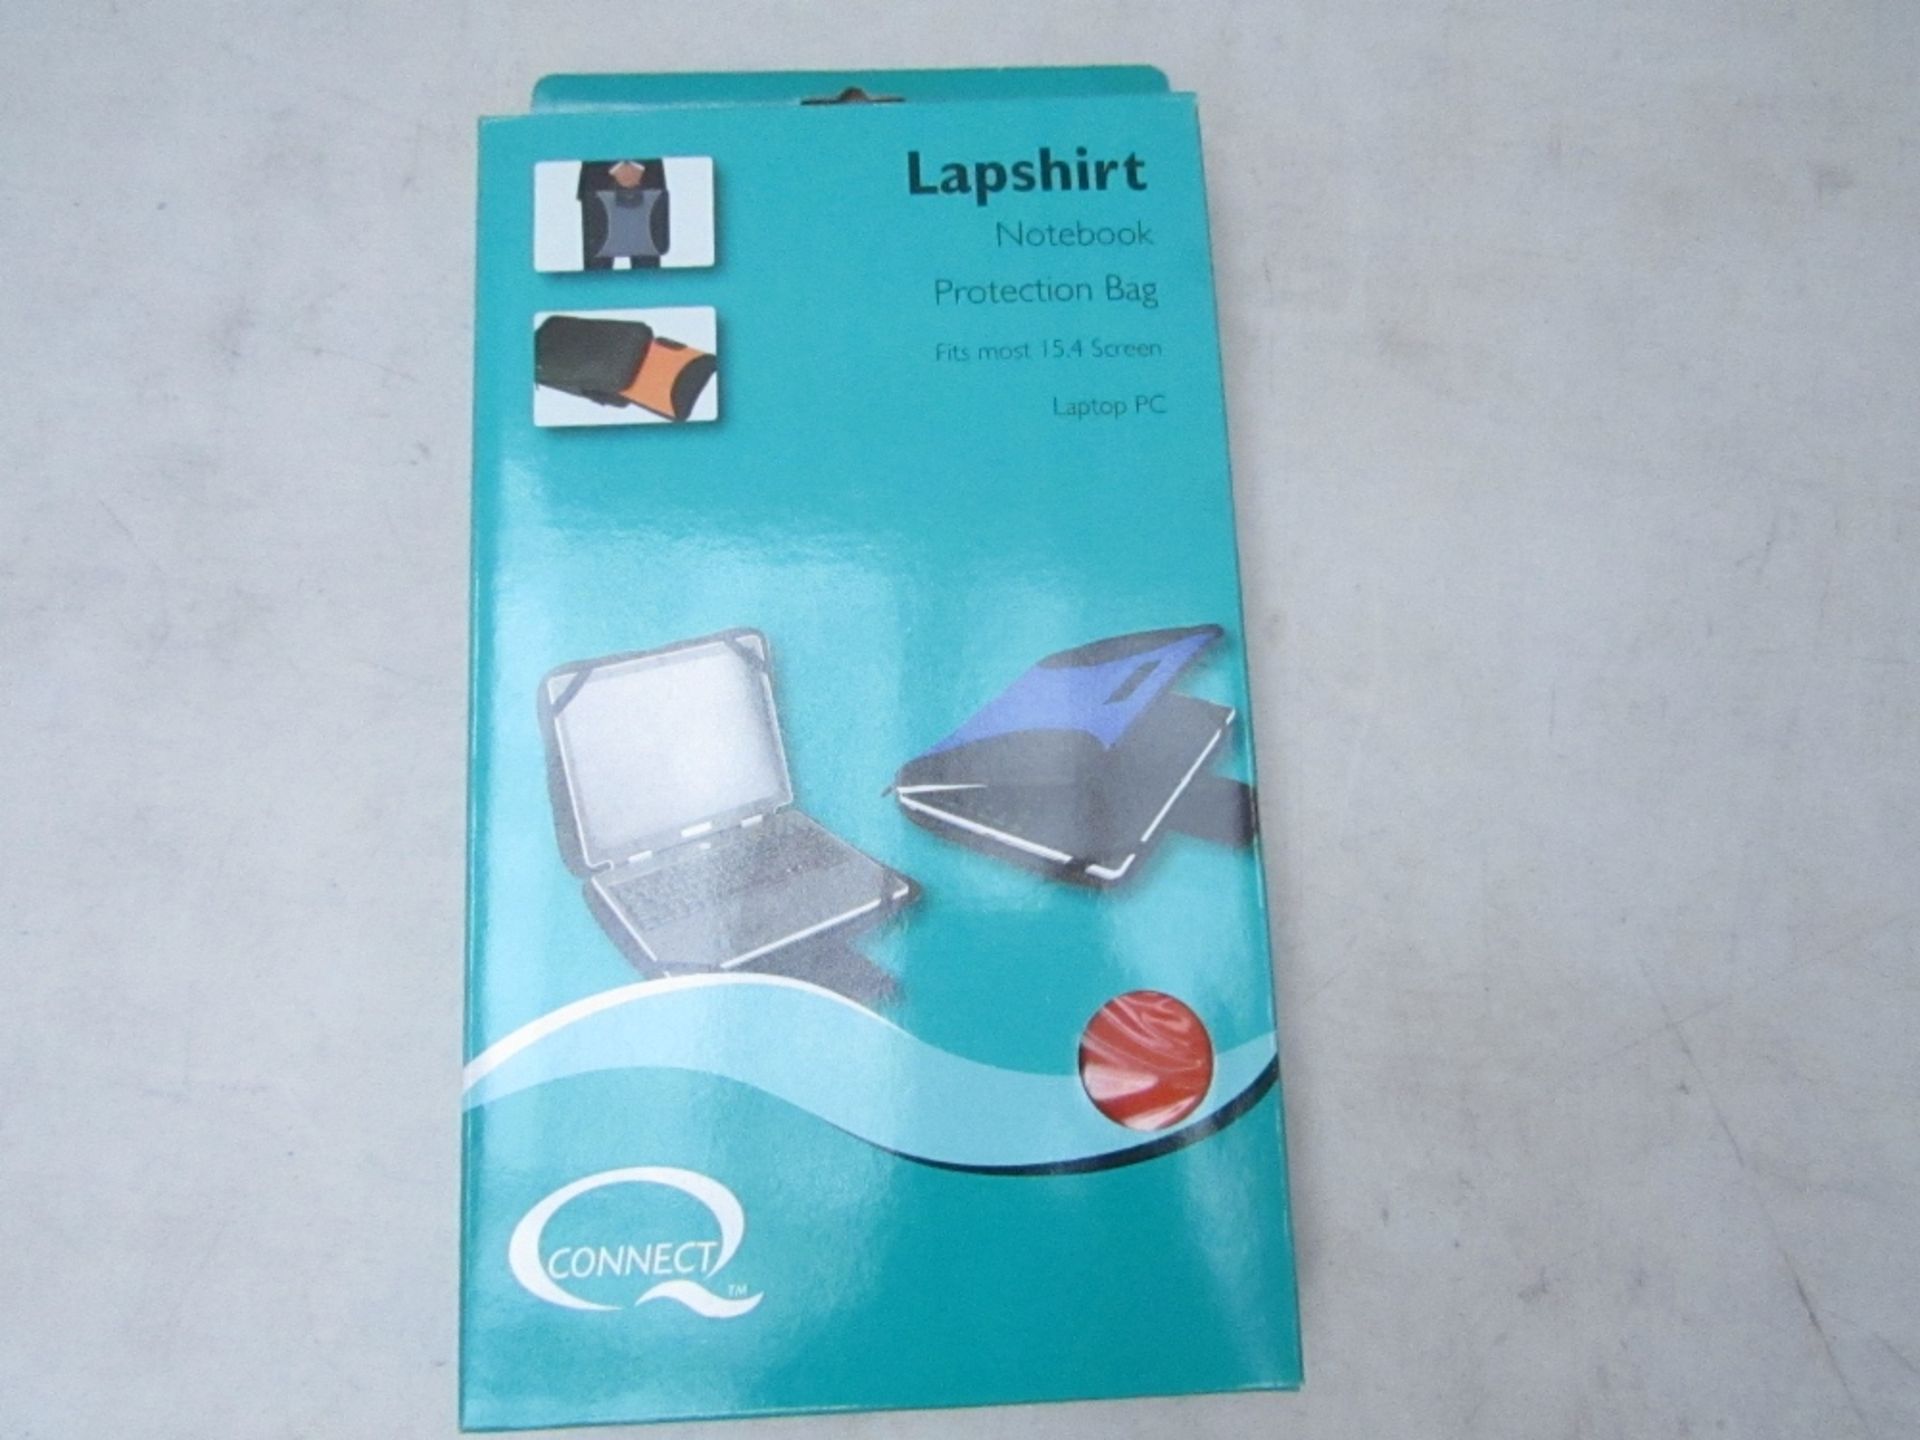 Q-Connect lapshirt notebook protection bag, fits most 15.4 screens, unchecked and boxed